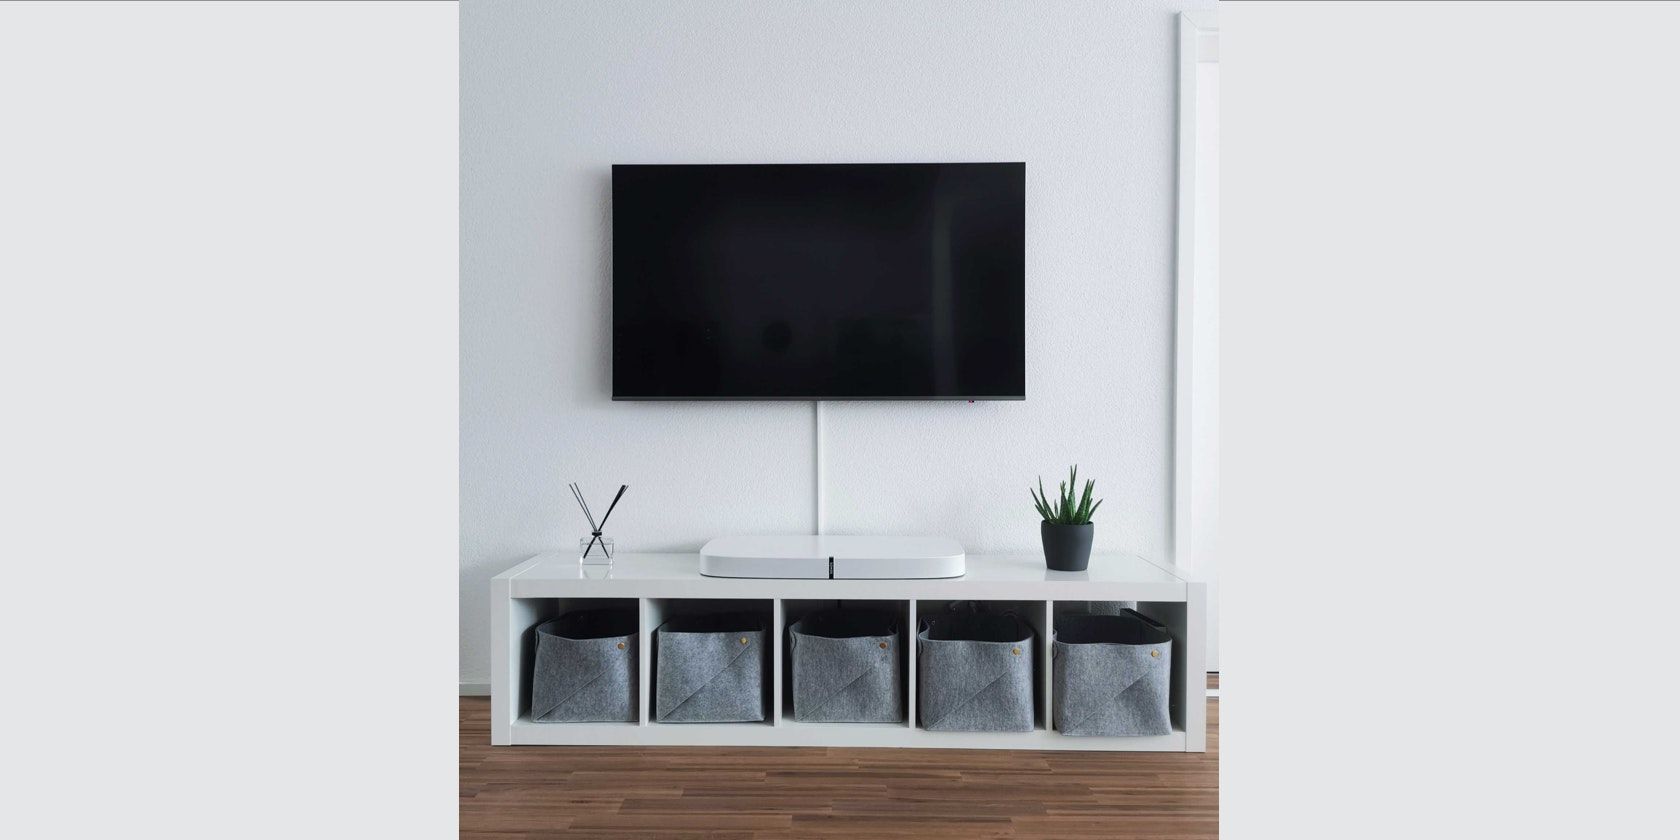 A photo of a television mounted on the wall with the cables running through cable trunking below it.